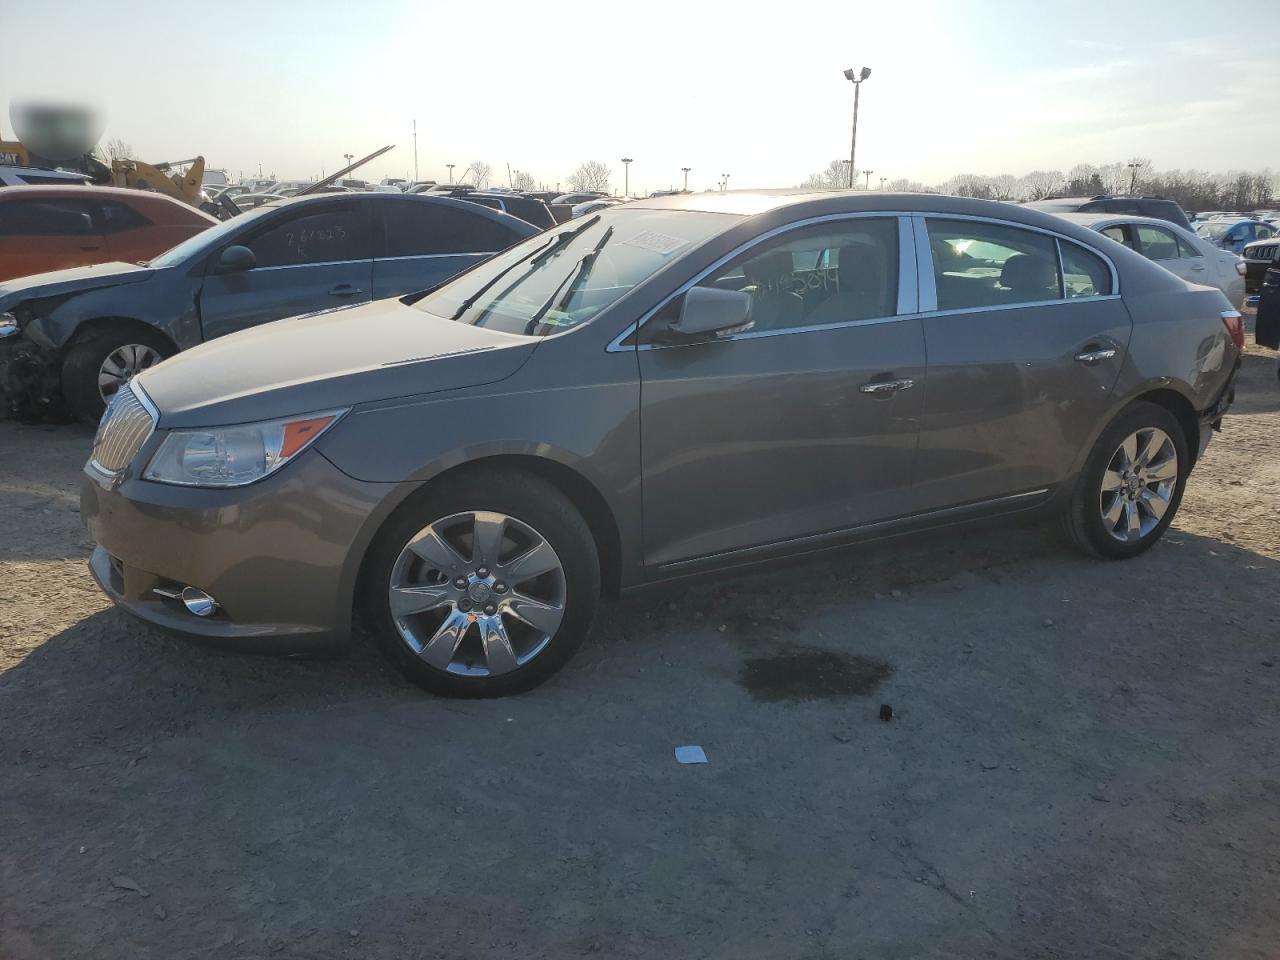 vin: 1G4GH5E32CF151233 1G4GH5E32CF151233 2012 buick lacrosse 3600 for Sale in 46254 2452, In - Indianapolis, Indianapolis, USA